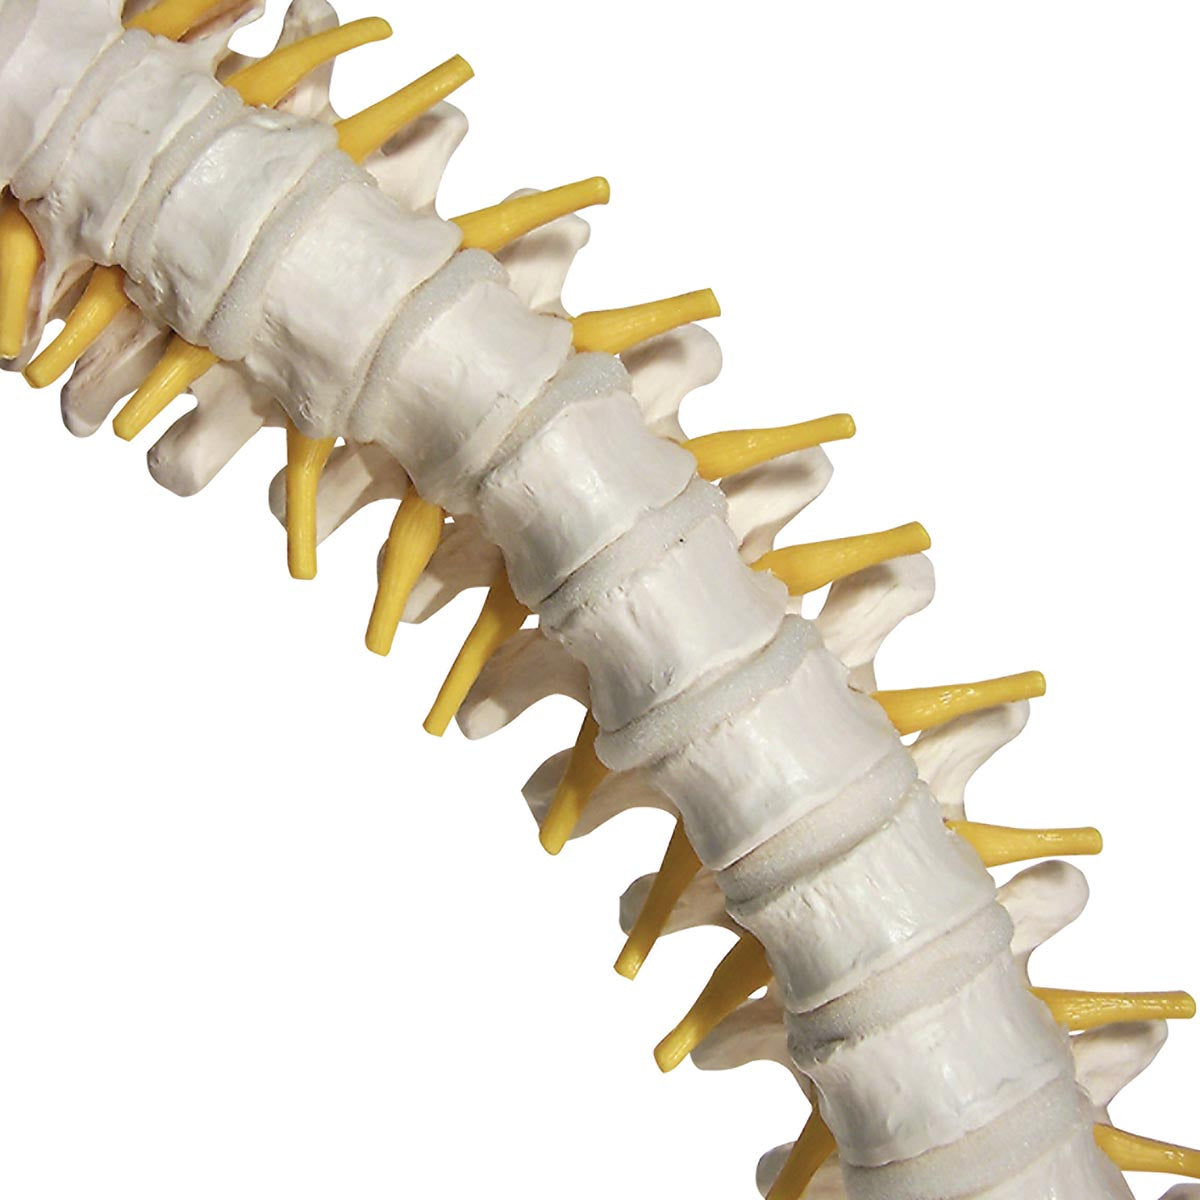 Flexible model of the spine with extra-soft discs, nerves etc. presented on a stand